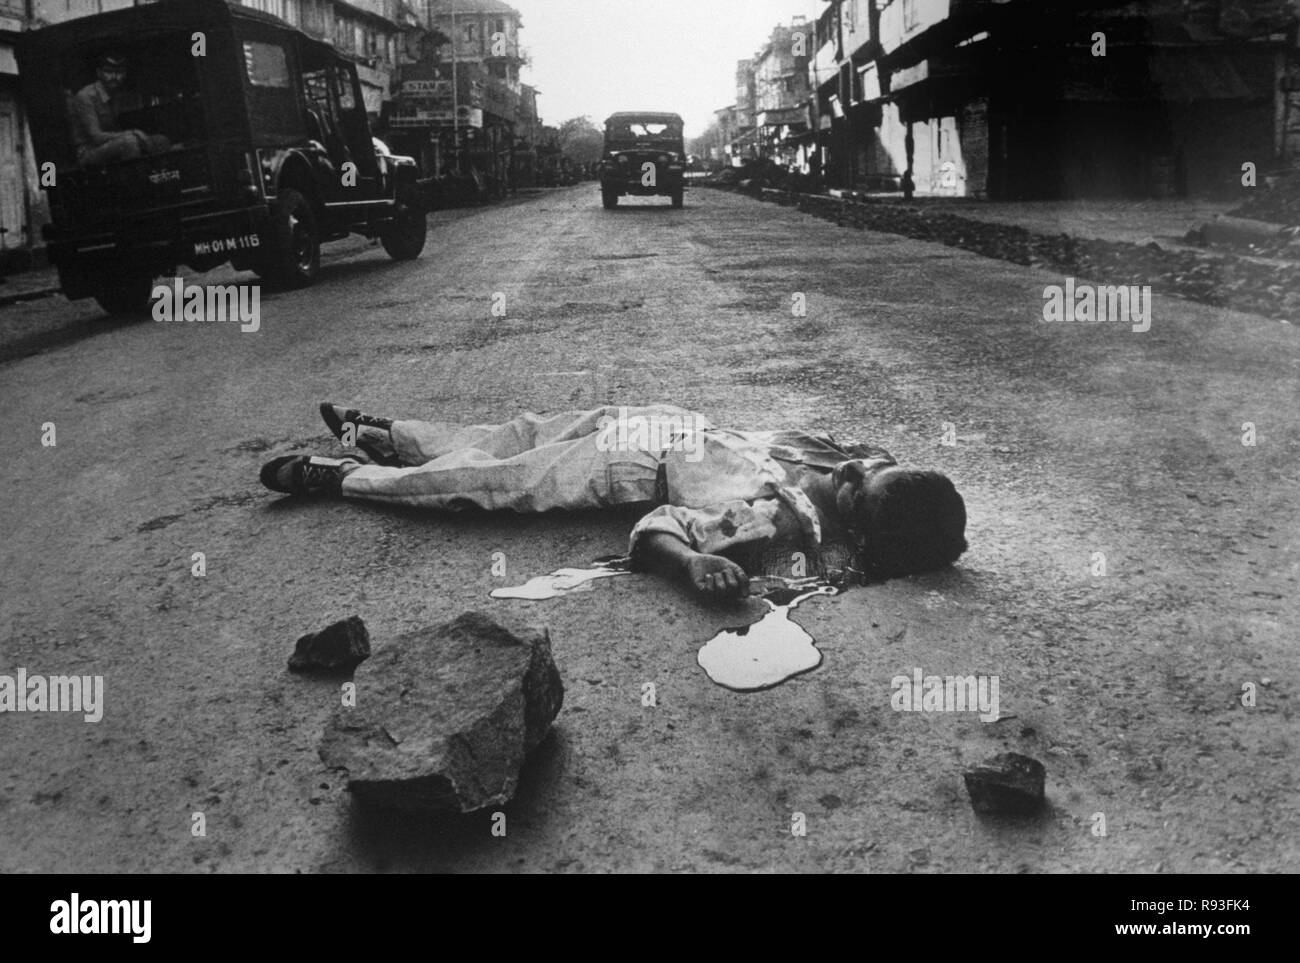 Bombay riots in December 1992, dead man on road during Bombay riots in Bombay, Mumbai, Maharashtra, India, old vintage 1900s picture Stock Photo